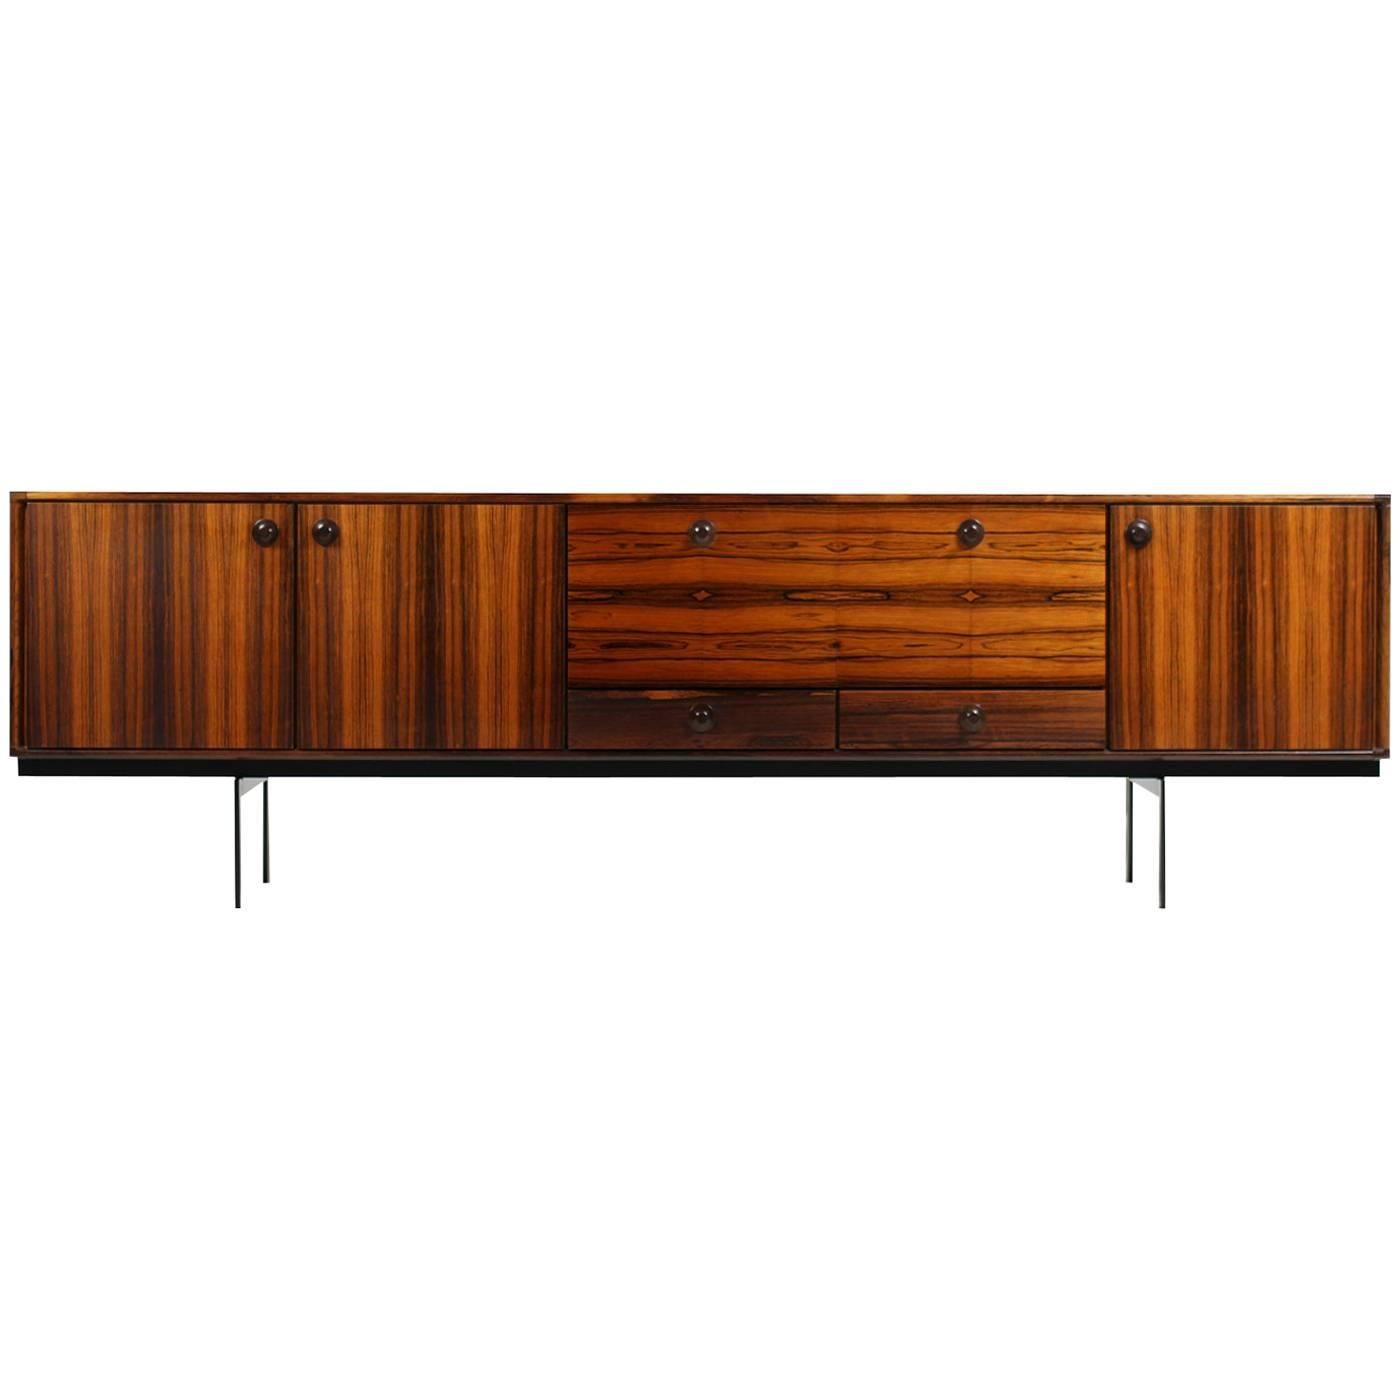 Large 1960s Rosewood Sideboard by William Watting for Fristho with Iron Base For Sale